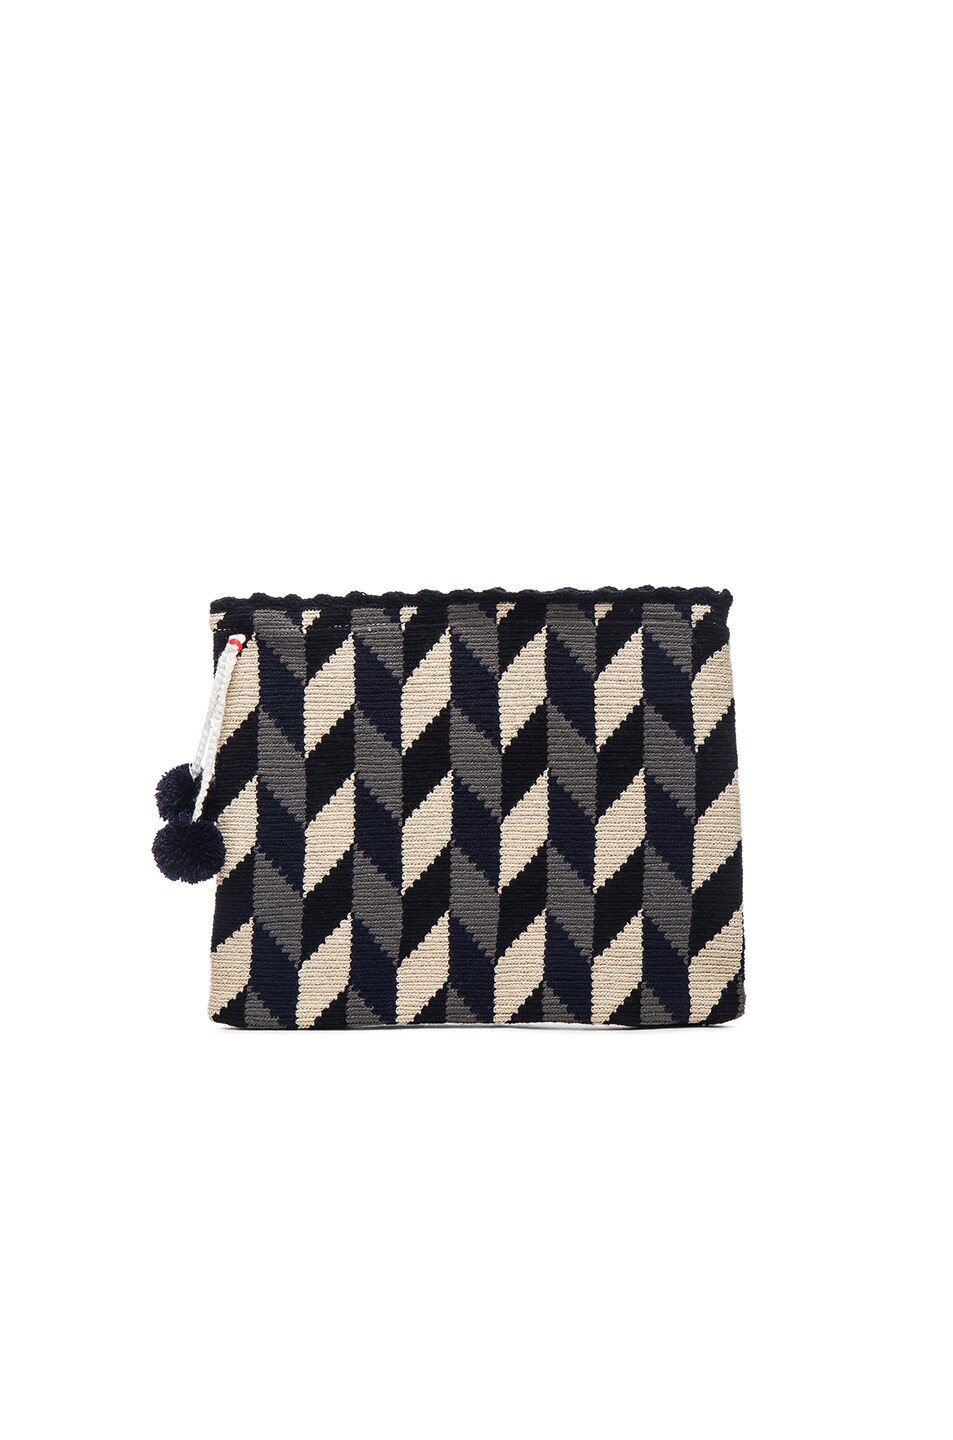 Image 1 of Sophie Anderson Lia 4 Clutch in Neutral Zig Zag